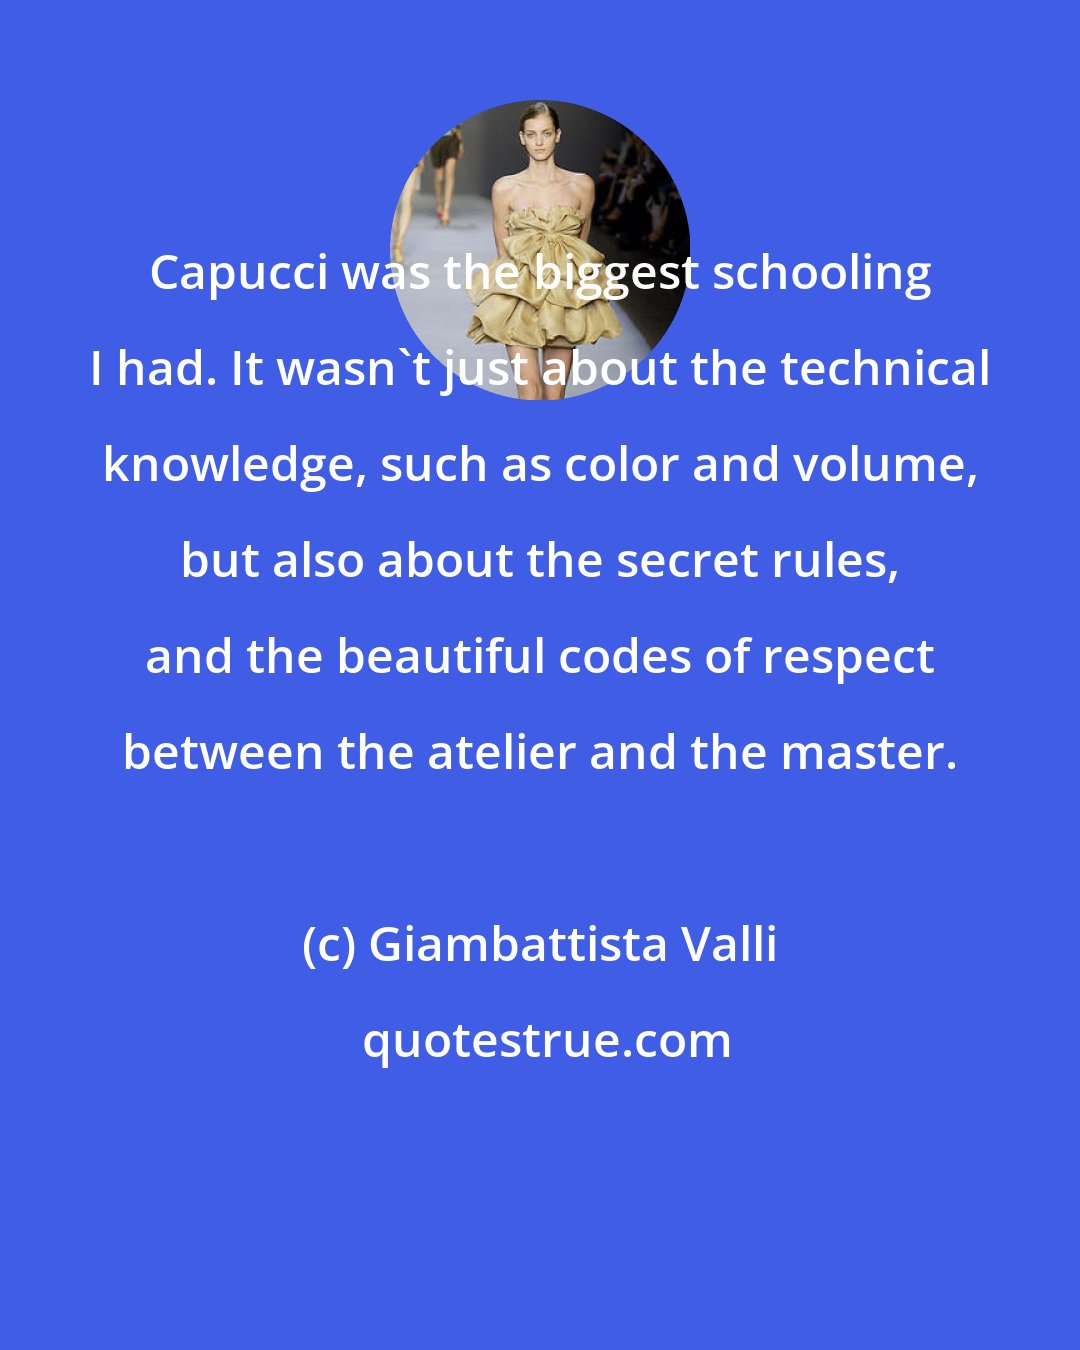 Giambattista Valli: Capucci was the biggest schooling I had. It wasn't just about the technical knowledge, such as color and volume, but also about the secret rules, and the beautiful codes of respect between the atelier and the master.